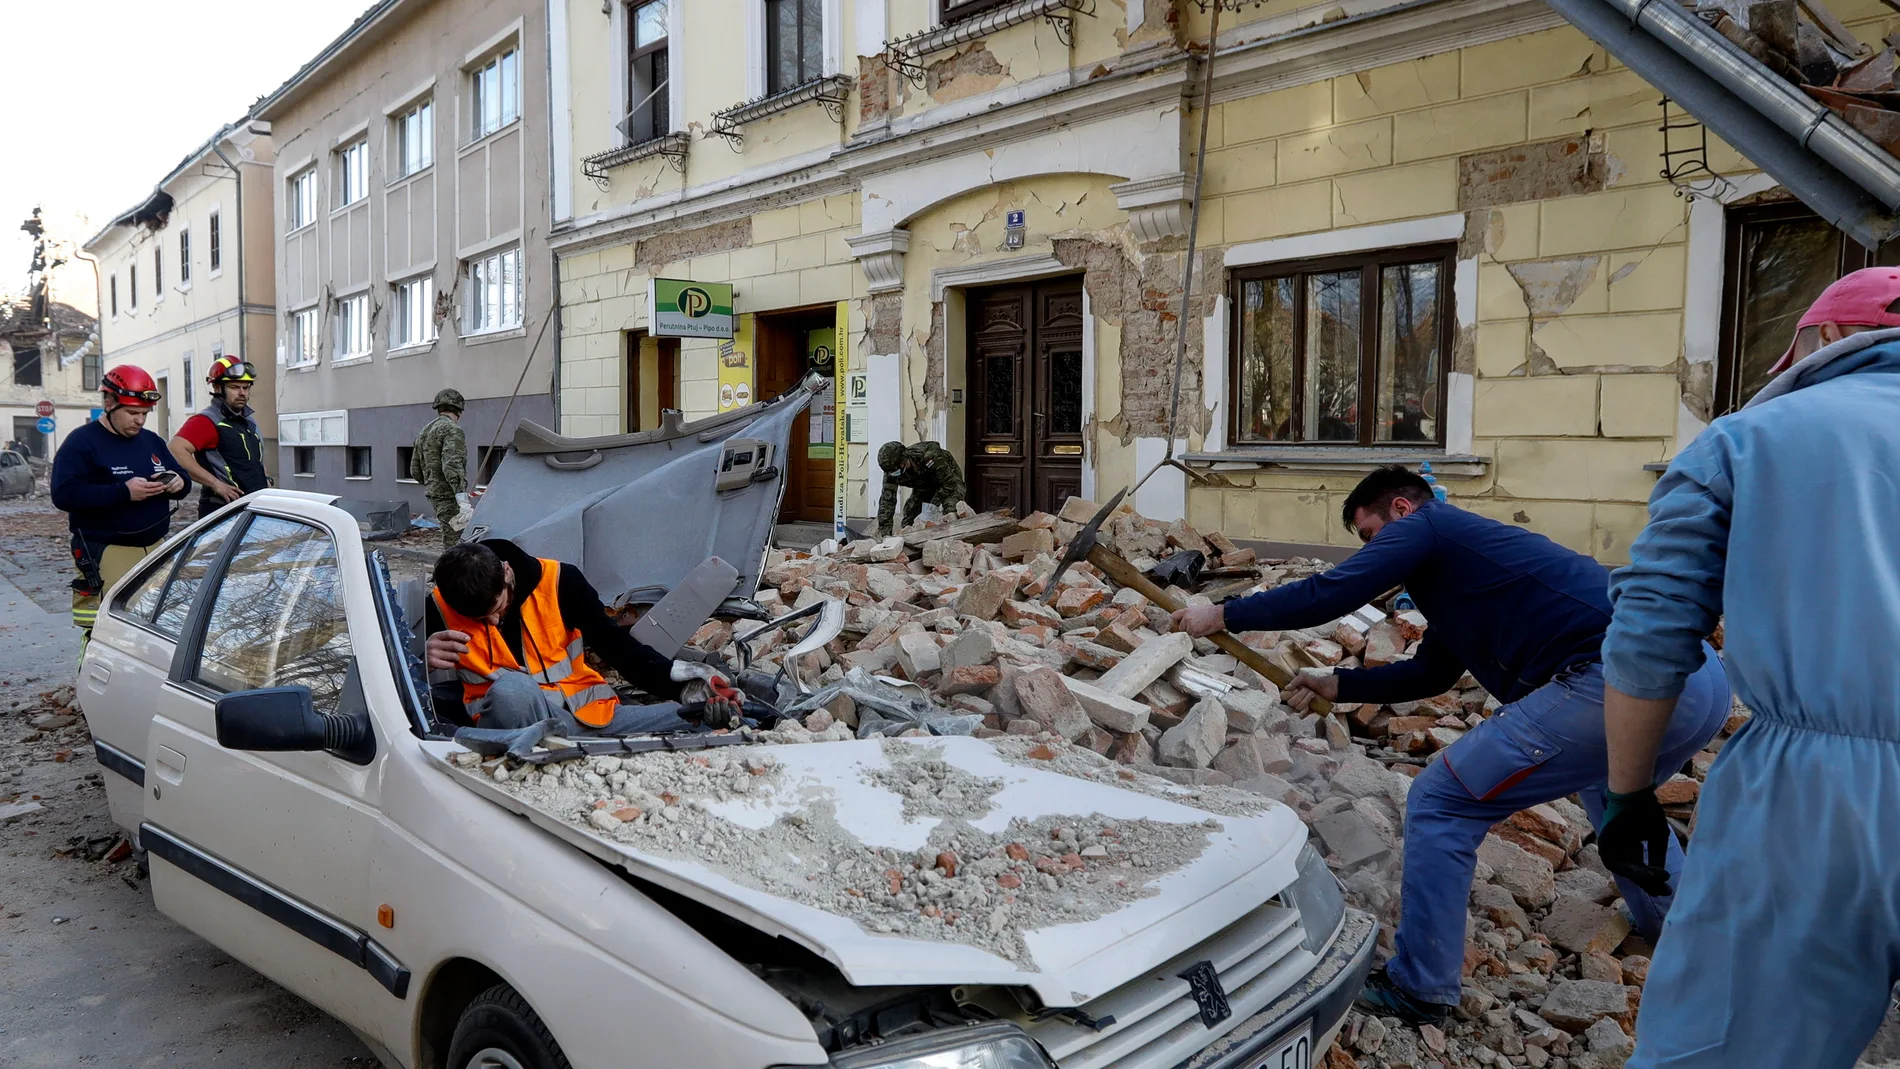 Petrinja (Croatia), 29/12/2020.- People and soldiers clean the rubble next to car and buildings damaged in an earthquake in Petrinja, Croatia, 29 December 2020. A 6.4 magnitude earthquake struck around 3km west south west of the town with reports of many injuries and at least one death. (Terremoto/sismo, Croacia) EFE/EPA/ANTONIO BAT